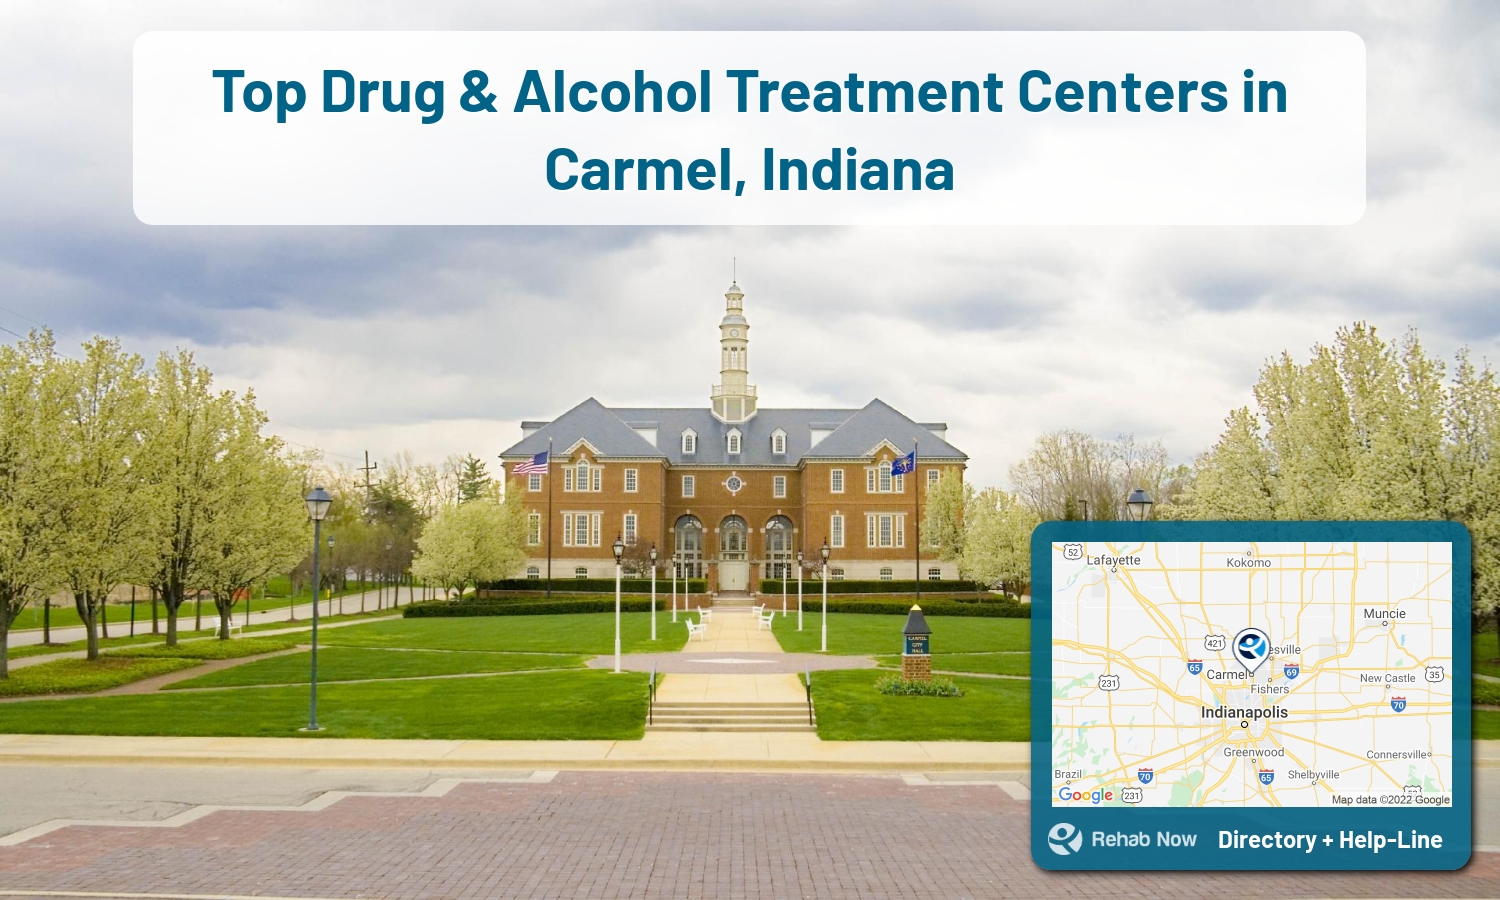 Let our expert counselors help find the best addiction treatment in Carmel, Indiana now with a free call to our hotline.